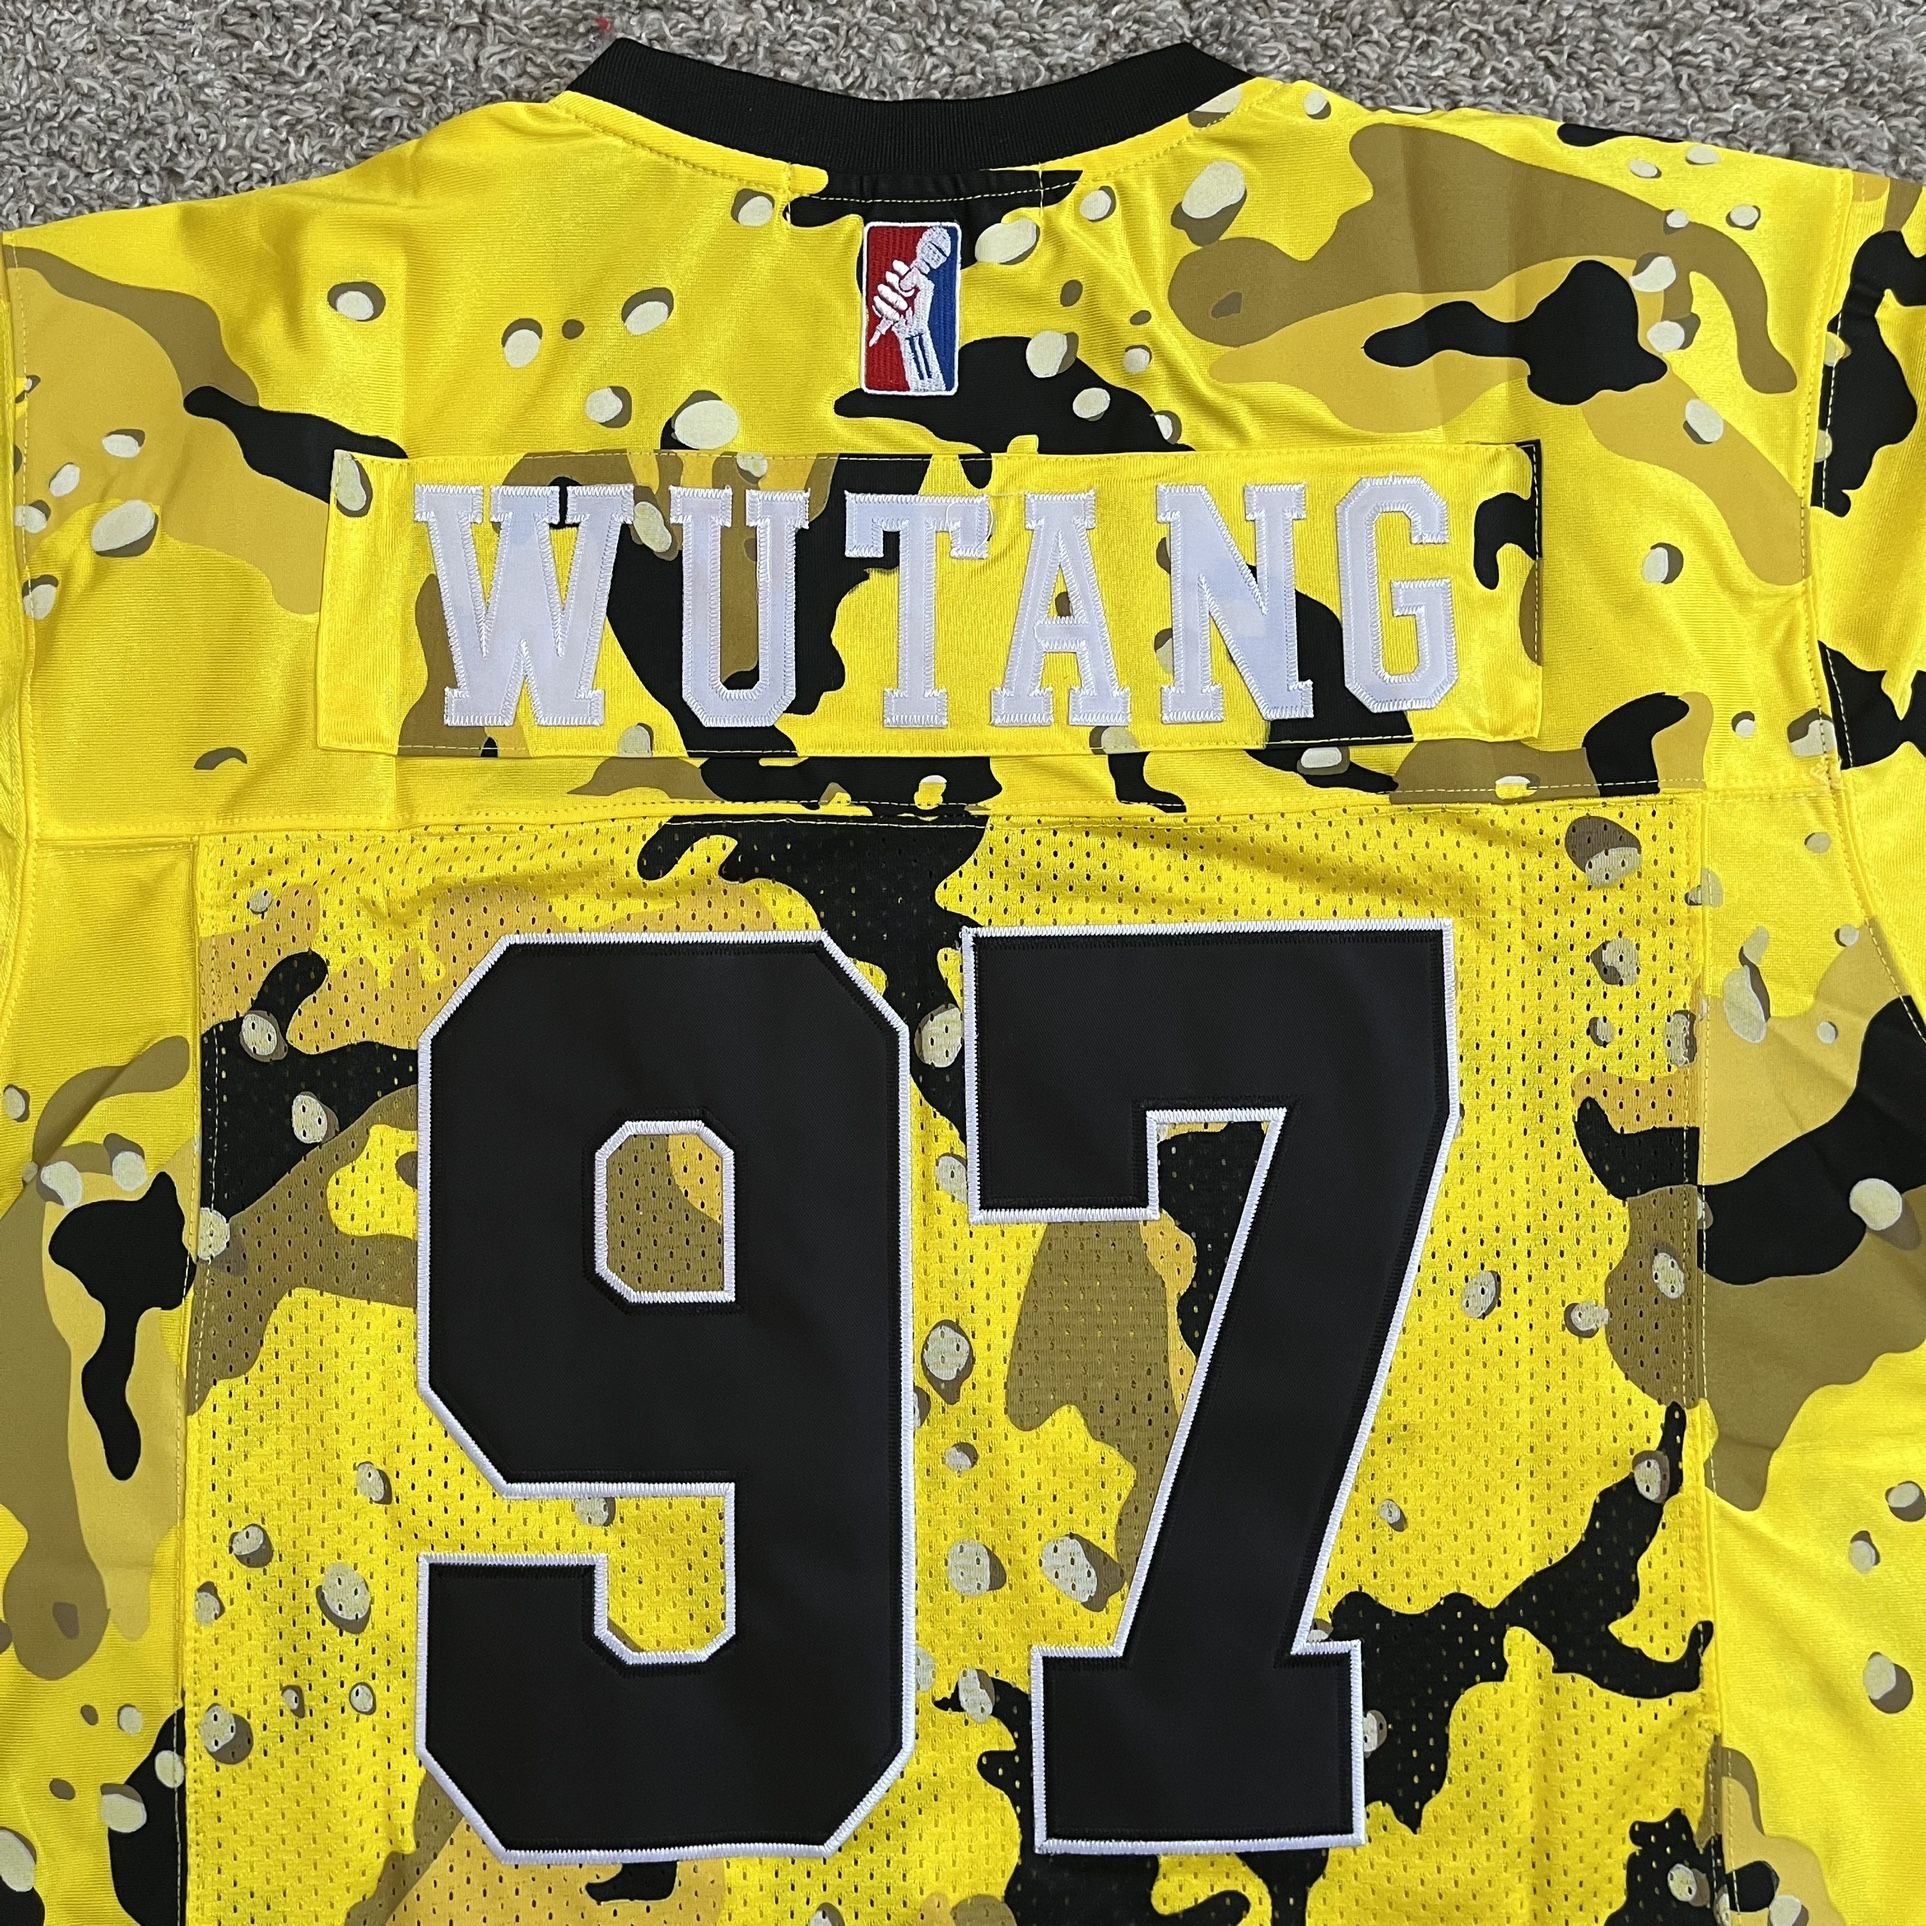 Wu-Tang Football Jersey Size XL Camouflage WuTang Gza Rza for Sale in  Corona, CA - OfferUp